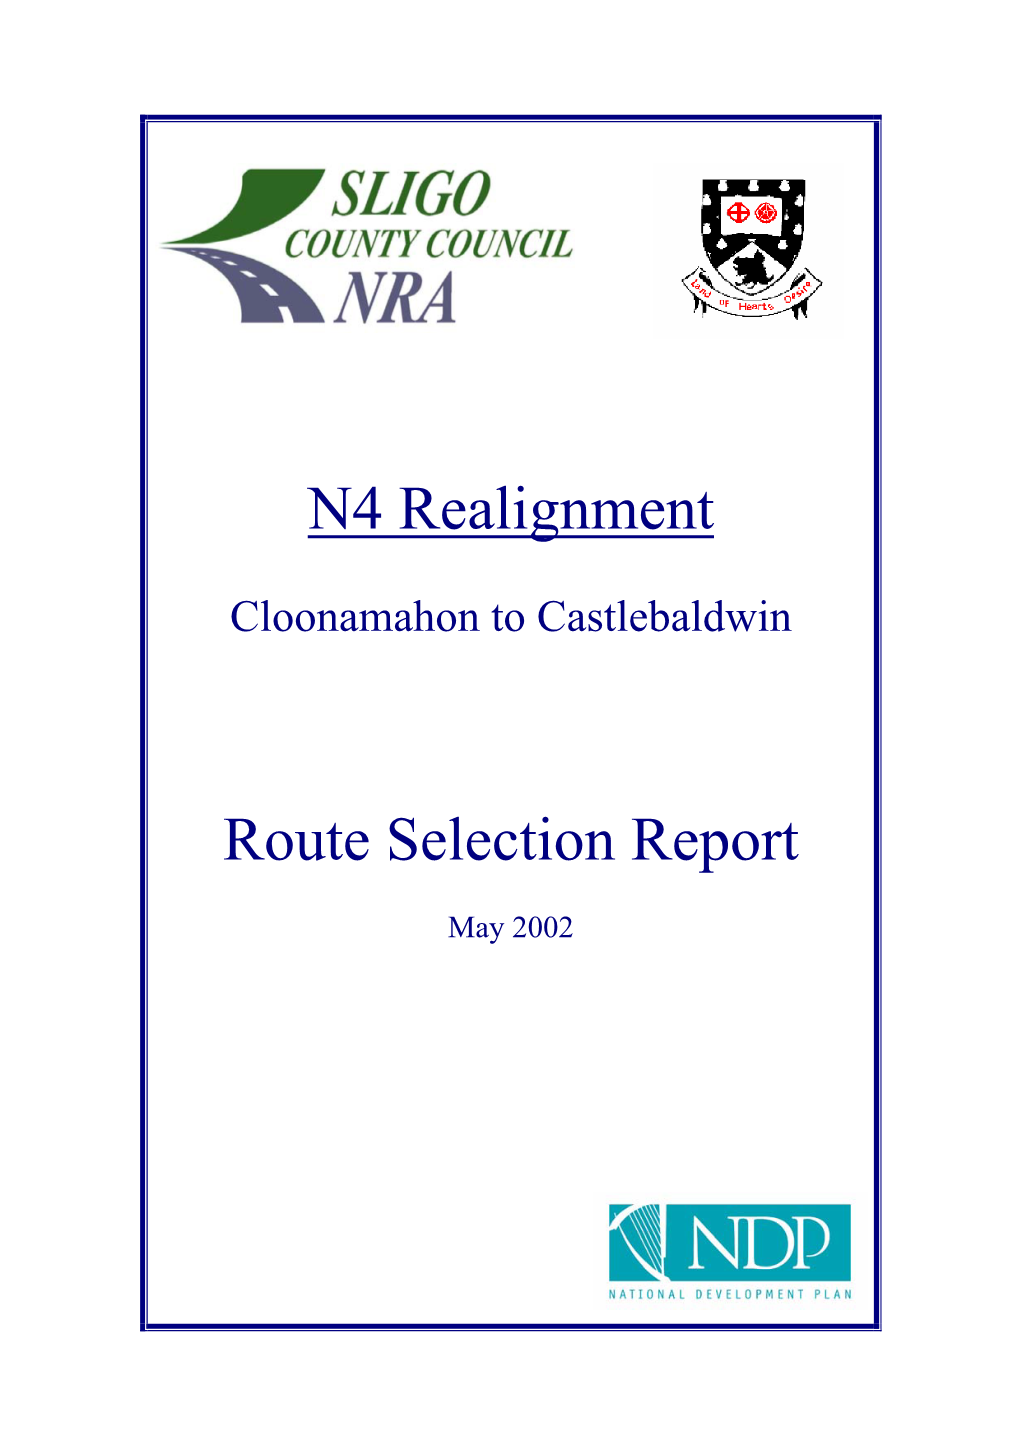 N4 Realignment Route Selection Report